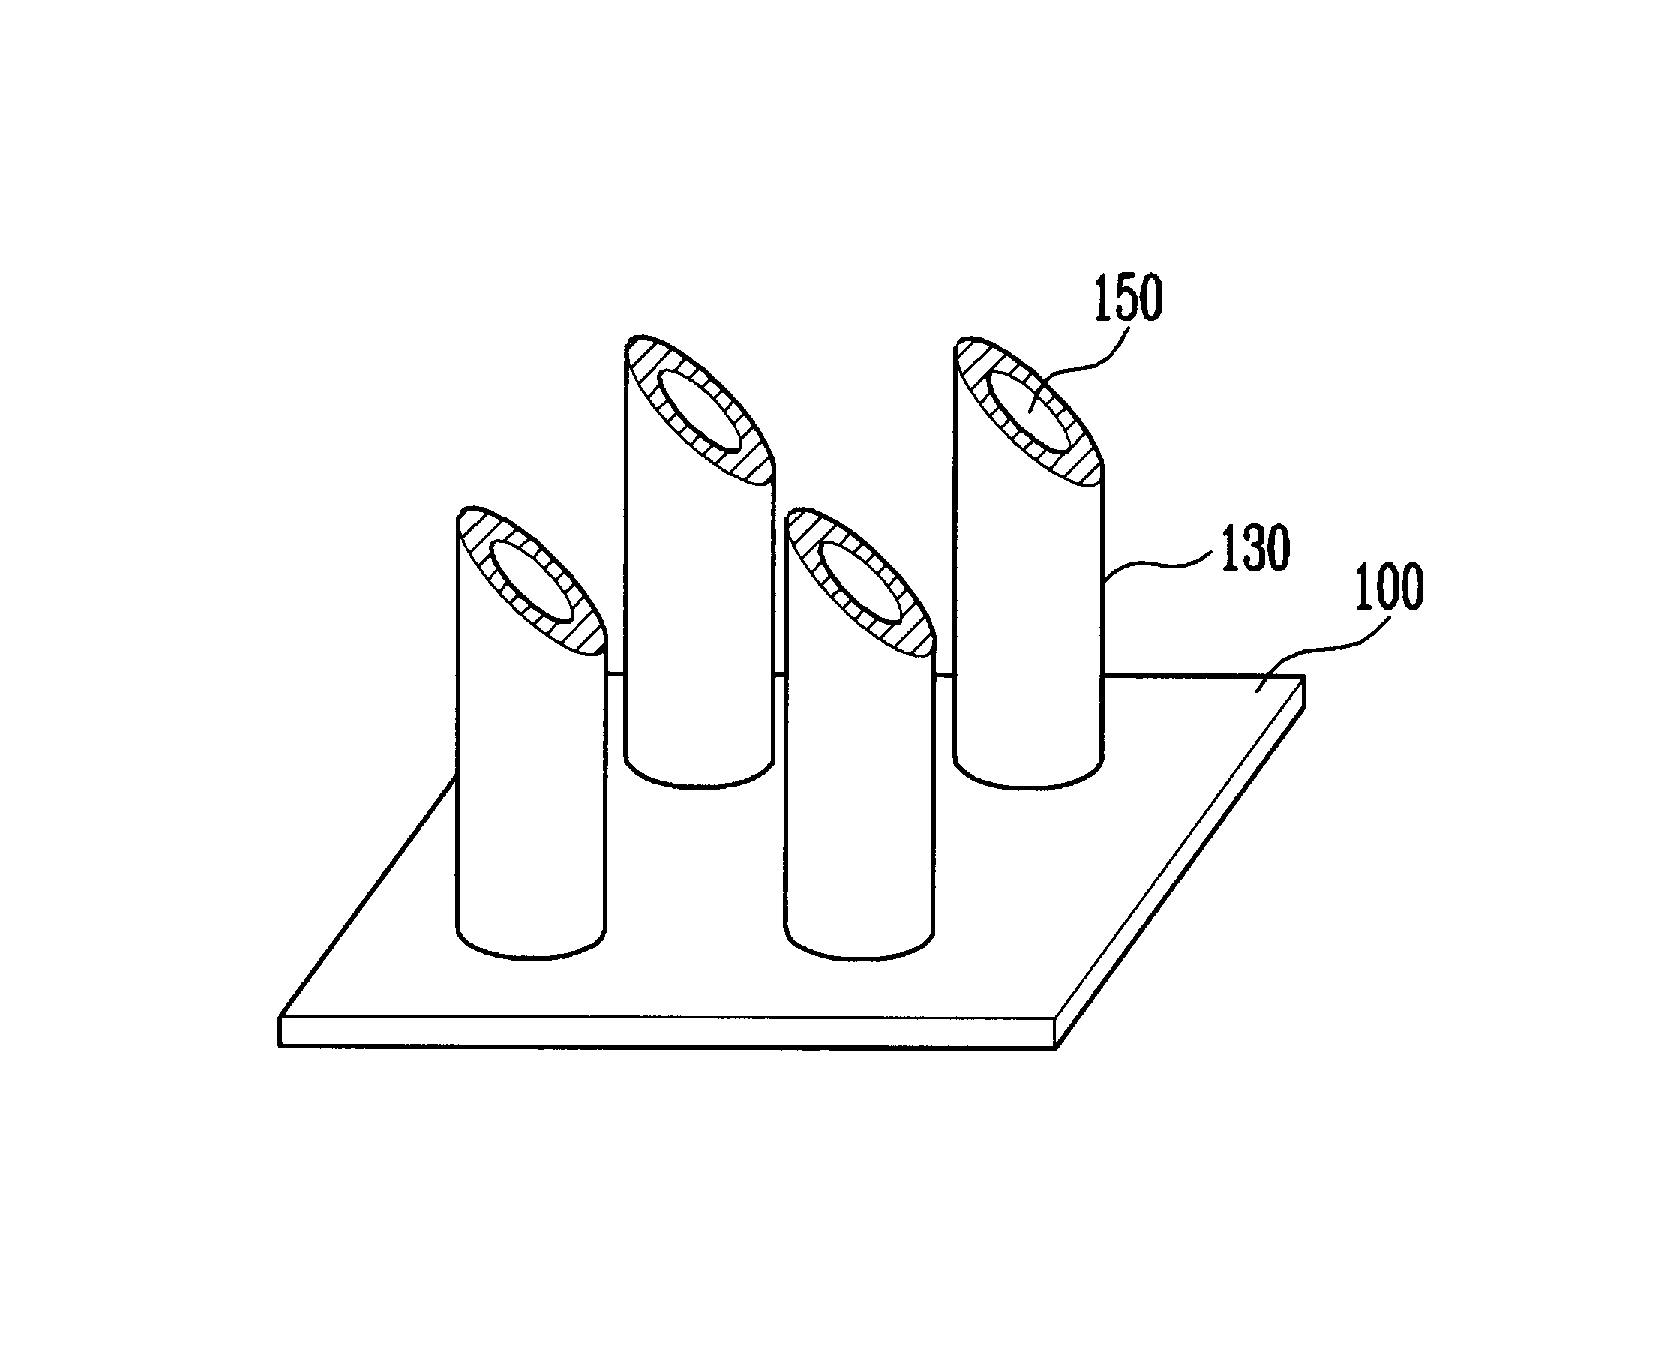 Method of manufacturing hollow microneedle structures